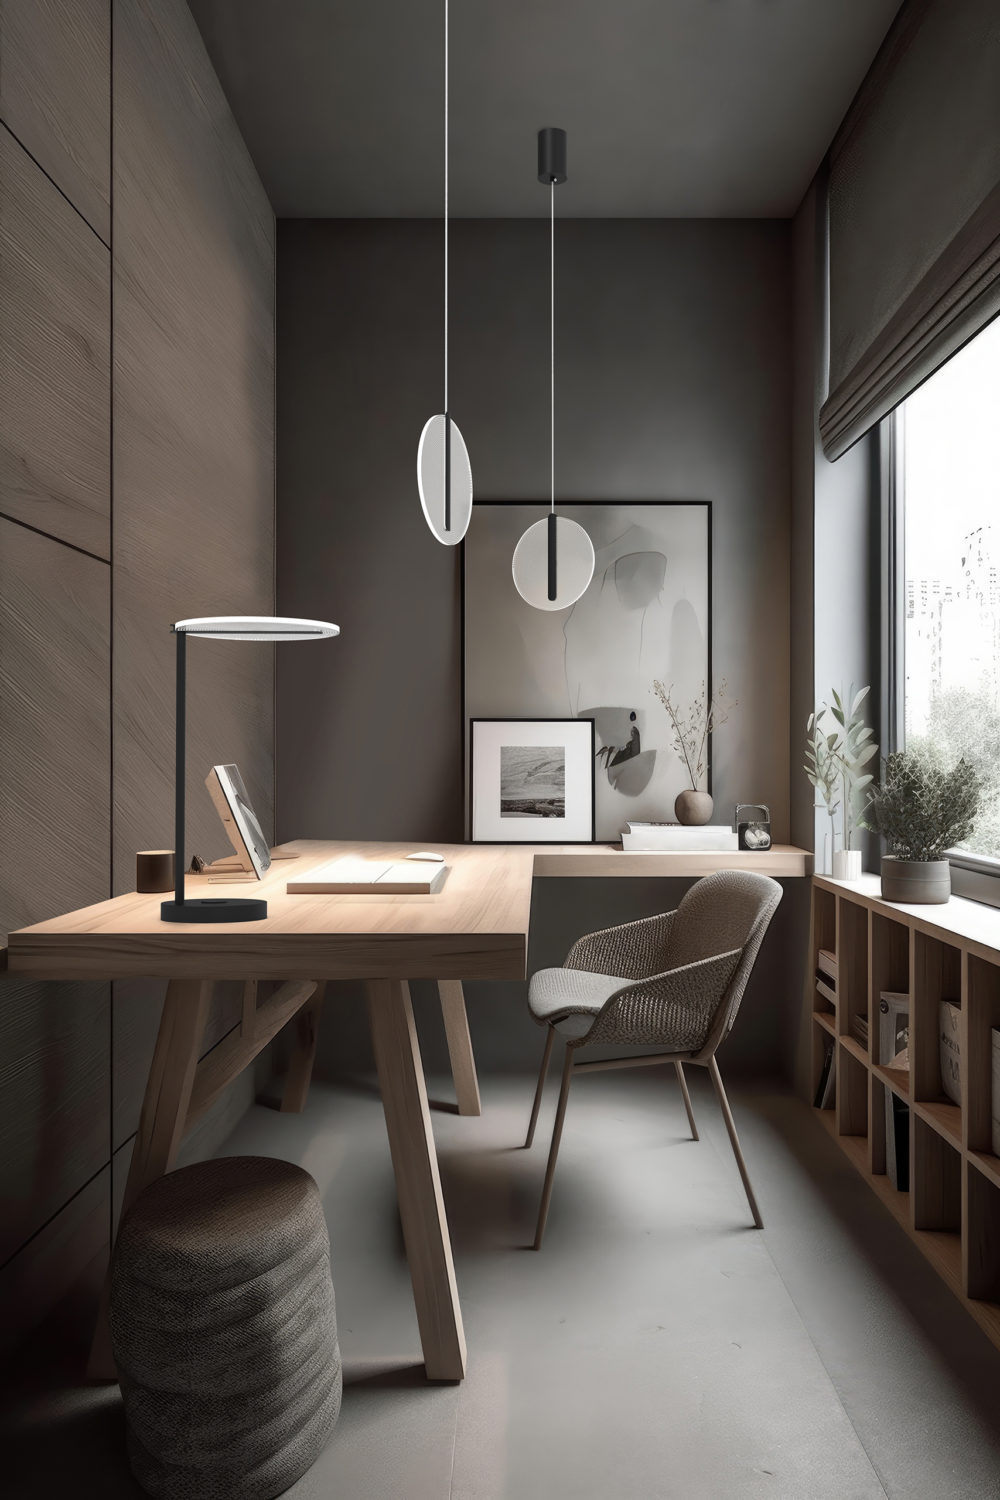 working room for home interior architecture with a minimalist st